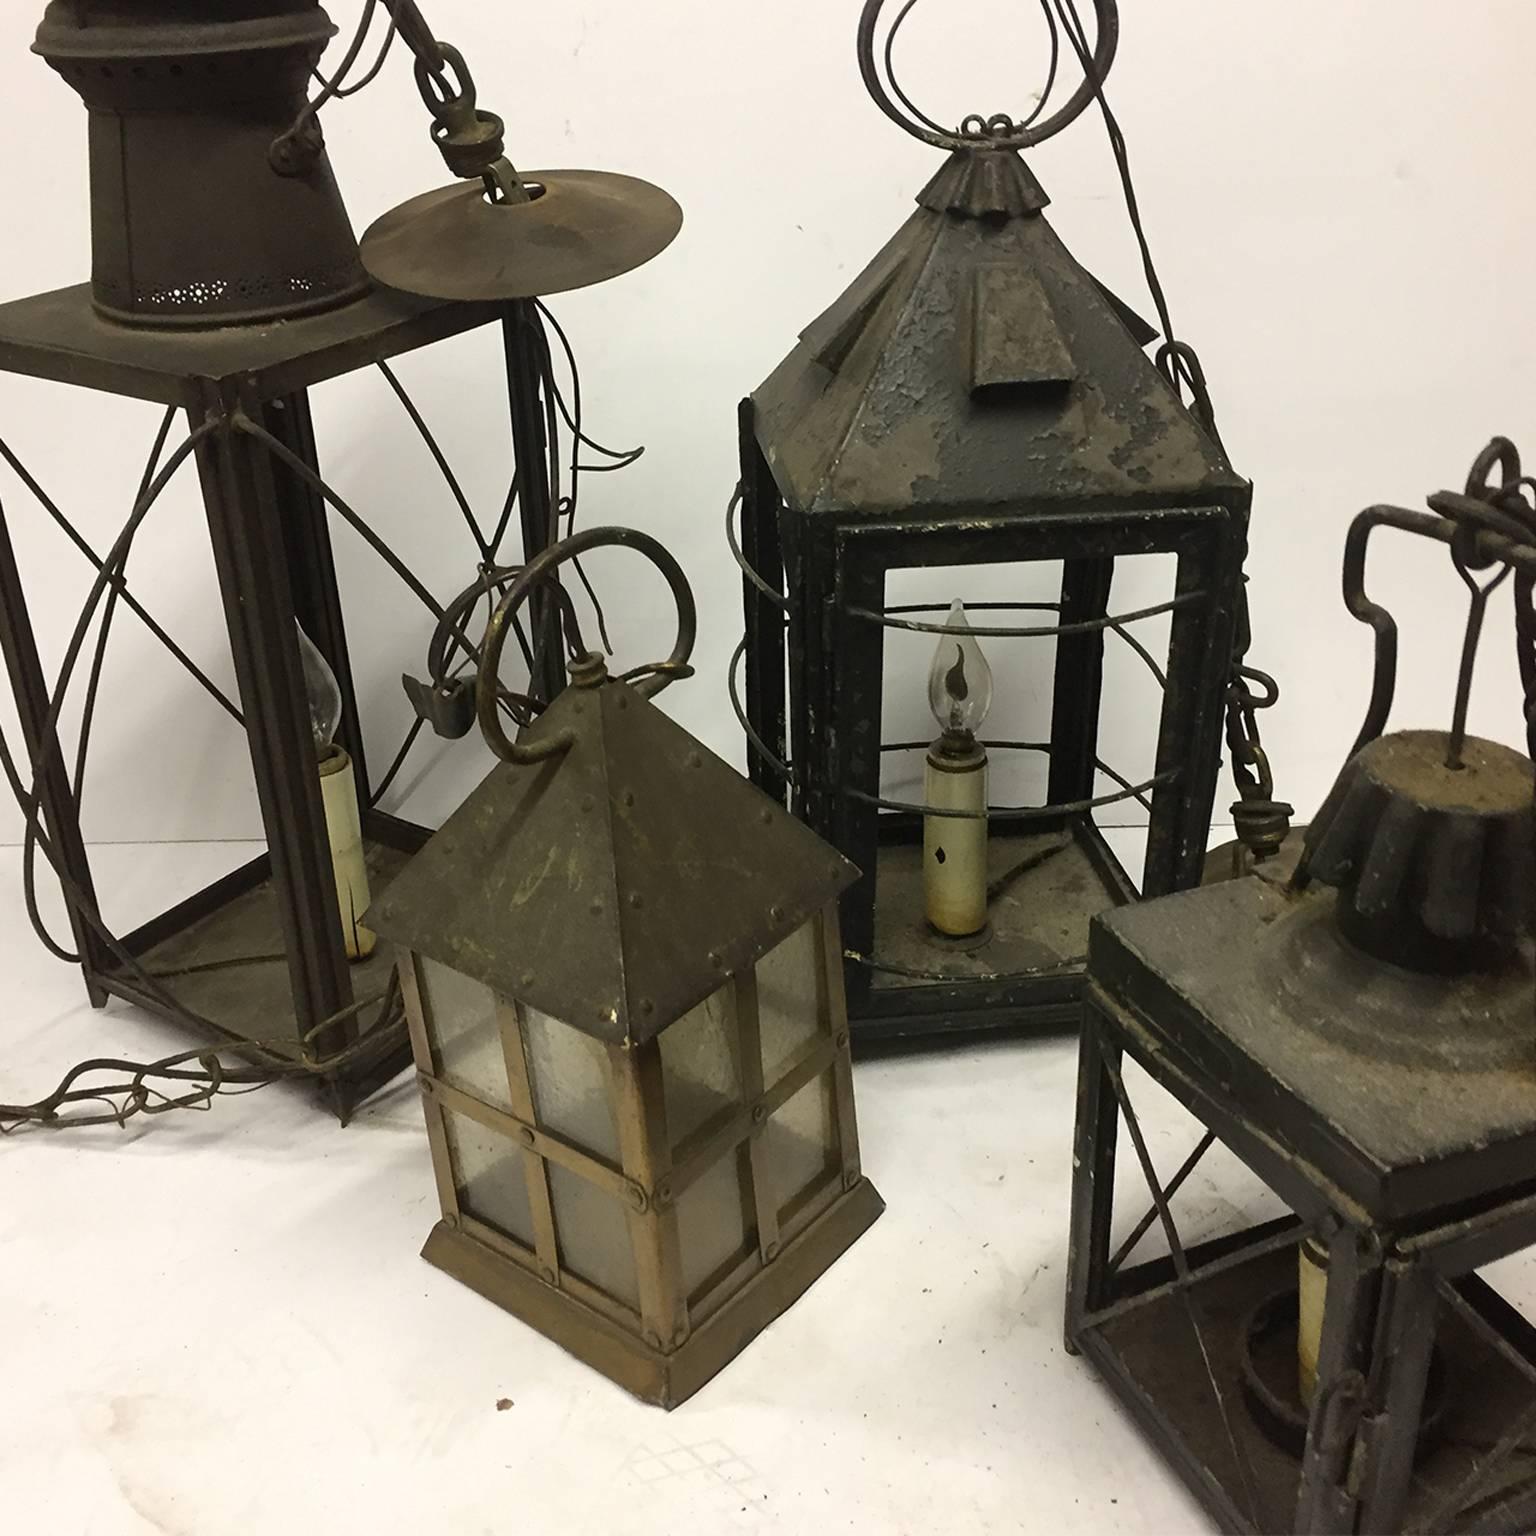 Vintage lanterns with candelabra base. Various sizes and styles, sure to add warmth and charm to a space.

Extra large lantern dimensions: 12